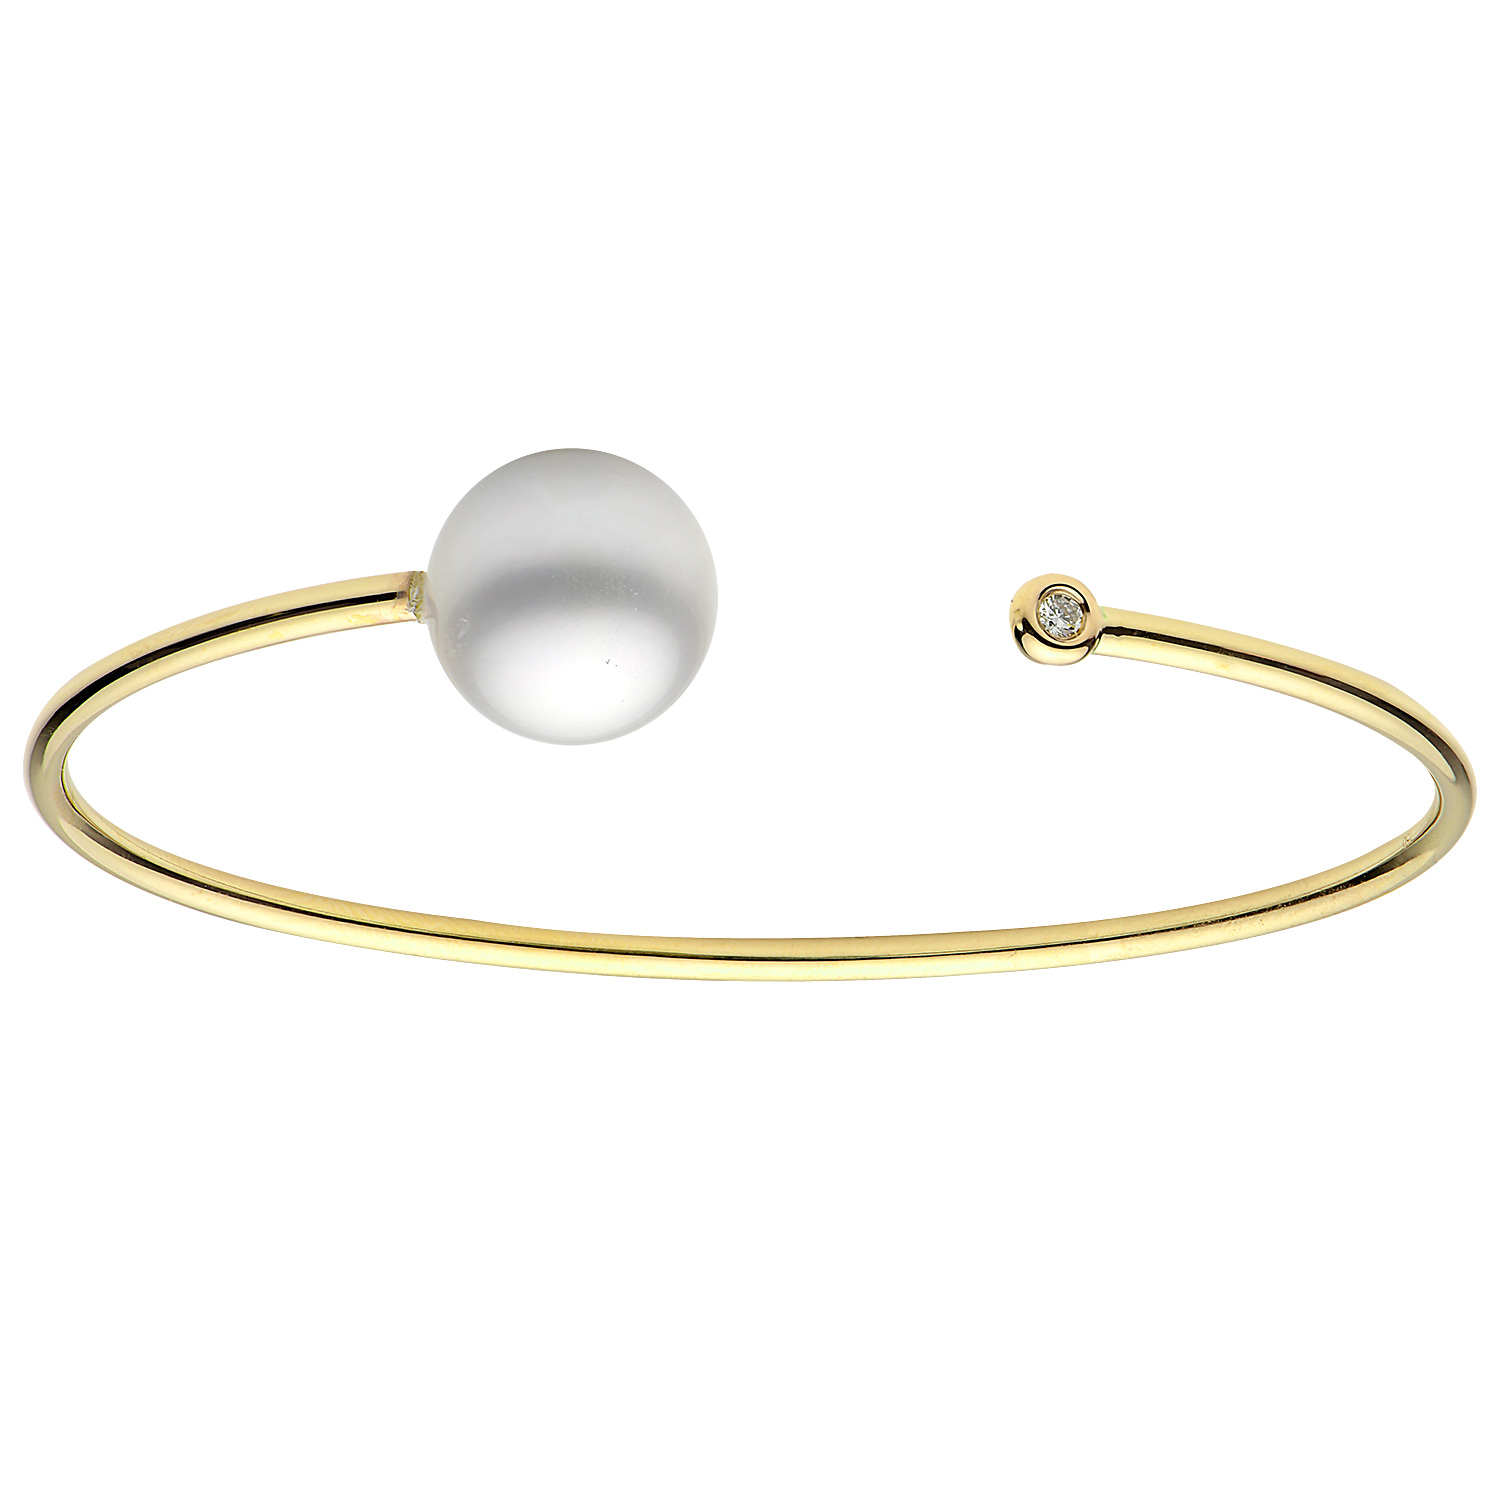 18 Karat yellow gold bangle with One 11.00mm South Sea Pearl And One 0.03Ct Round Brilliant G Vs Diamond